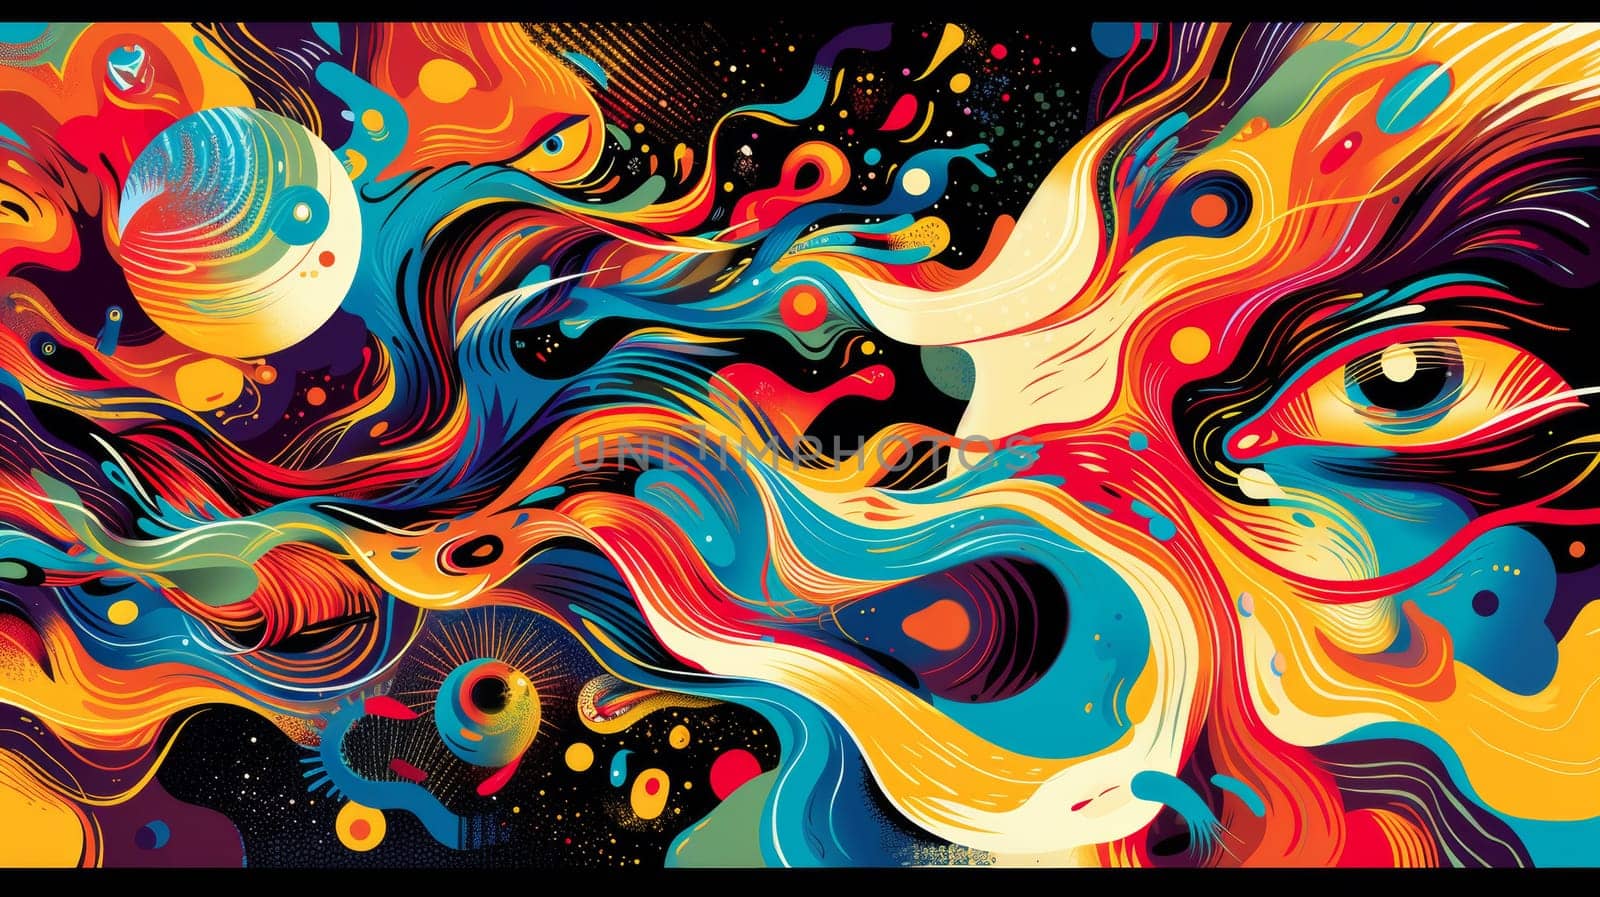 A colorful painting of a psychedelic swirl with an eye in the center